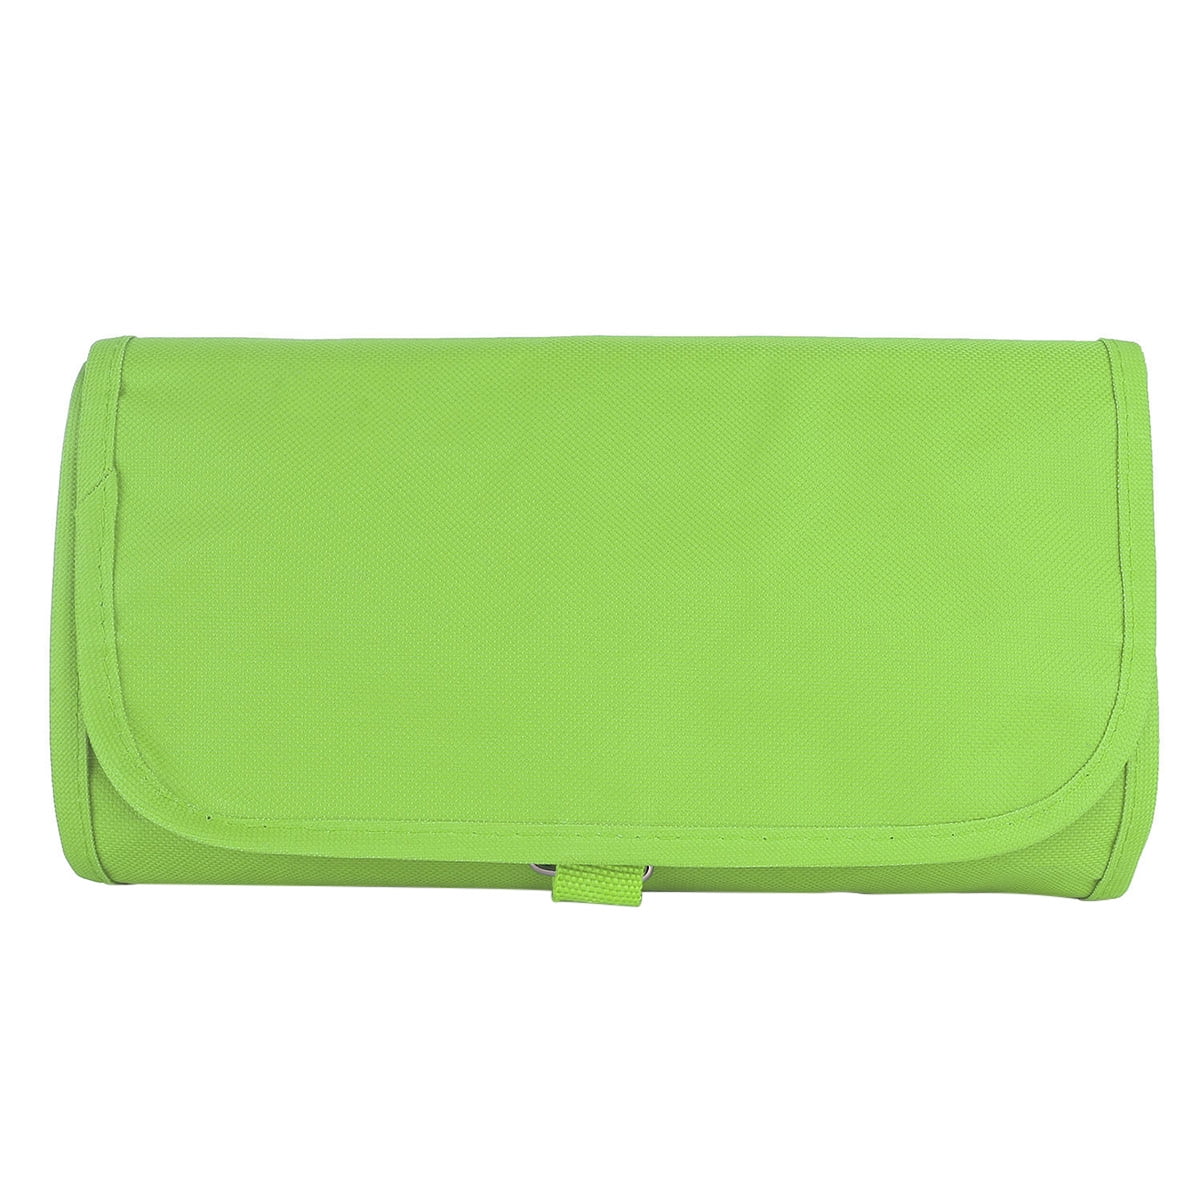 Small Makeup Bag Marine Anchor Green Cosmetic Bag For Women Travel Makeup  Organizer Handbag Pouch Compact Capacity For Daily Use 7.3x3x5.1in